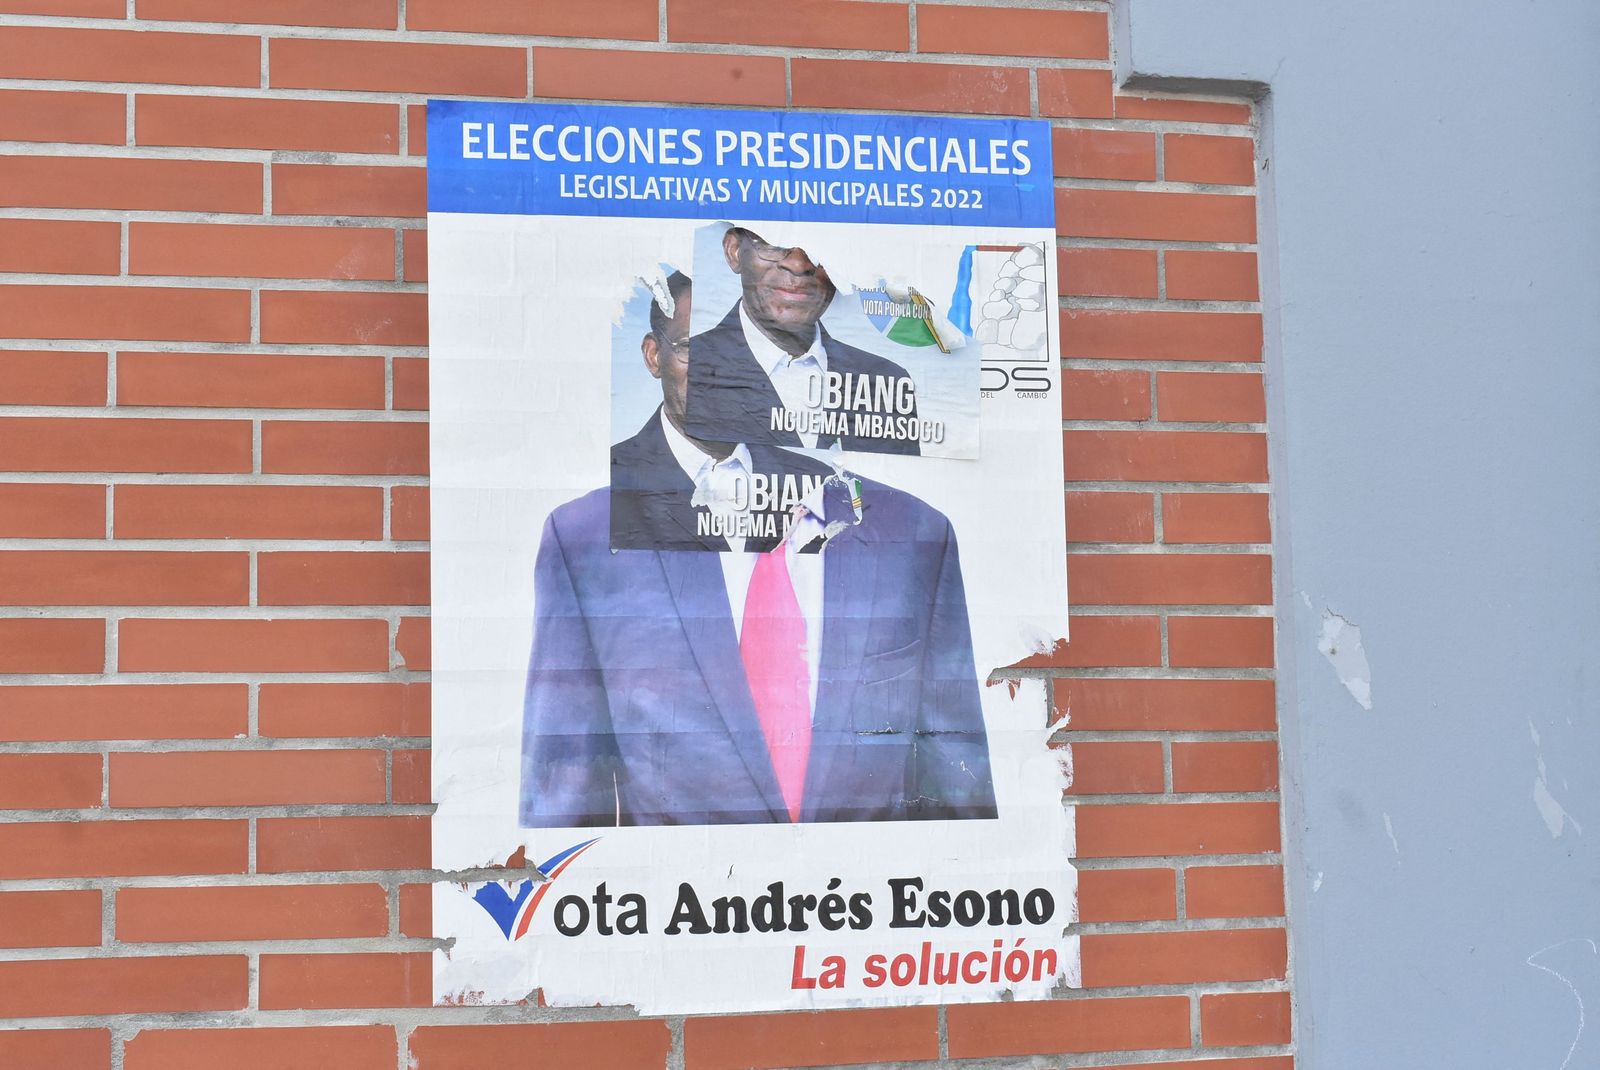 A campaign poster for for Equatorial Guinea President, Teodoro Obiang Nguema Mbasogo, is pated over a campaign poster of opponent Andres Esono Ondo of the Convergence for Social Democracy (CPDS),  in Malabo on November 17, 2022. - Equatorial Guinea's iron-fisted president, Teodoro Obiang Nguema Mbasogo, is eyeing a sixth term in office in elections on November 20, 2022, extending a world-record 43 years in power.
Obiang, 80, seized power in August 1979, toppling his uncle, Francisco Macias Ngueme, who was then executed by firing squad. (Photo by Samuel OBIANG / AFP) - AFP